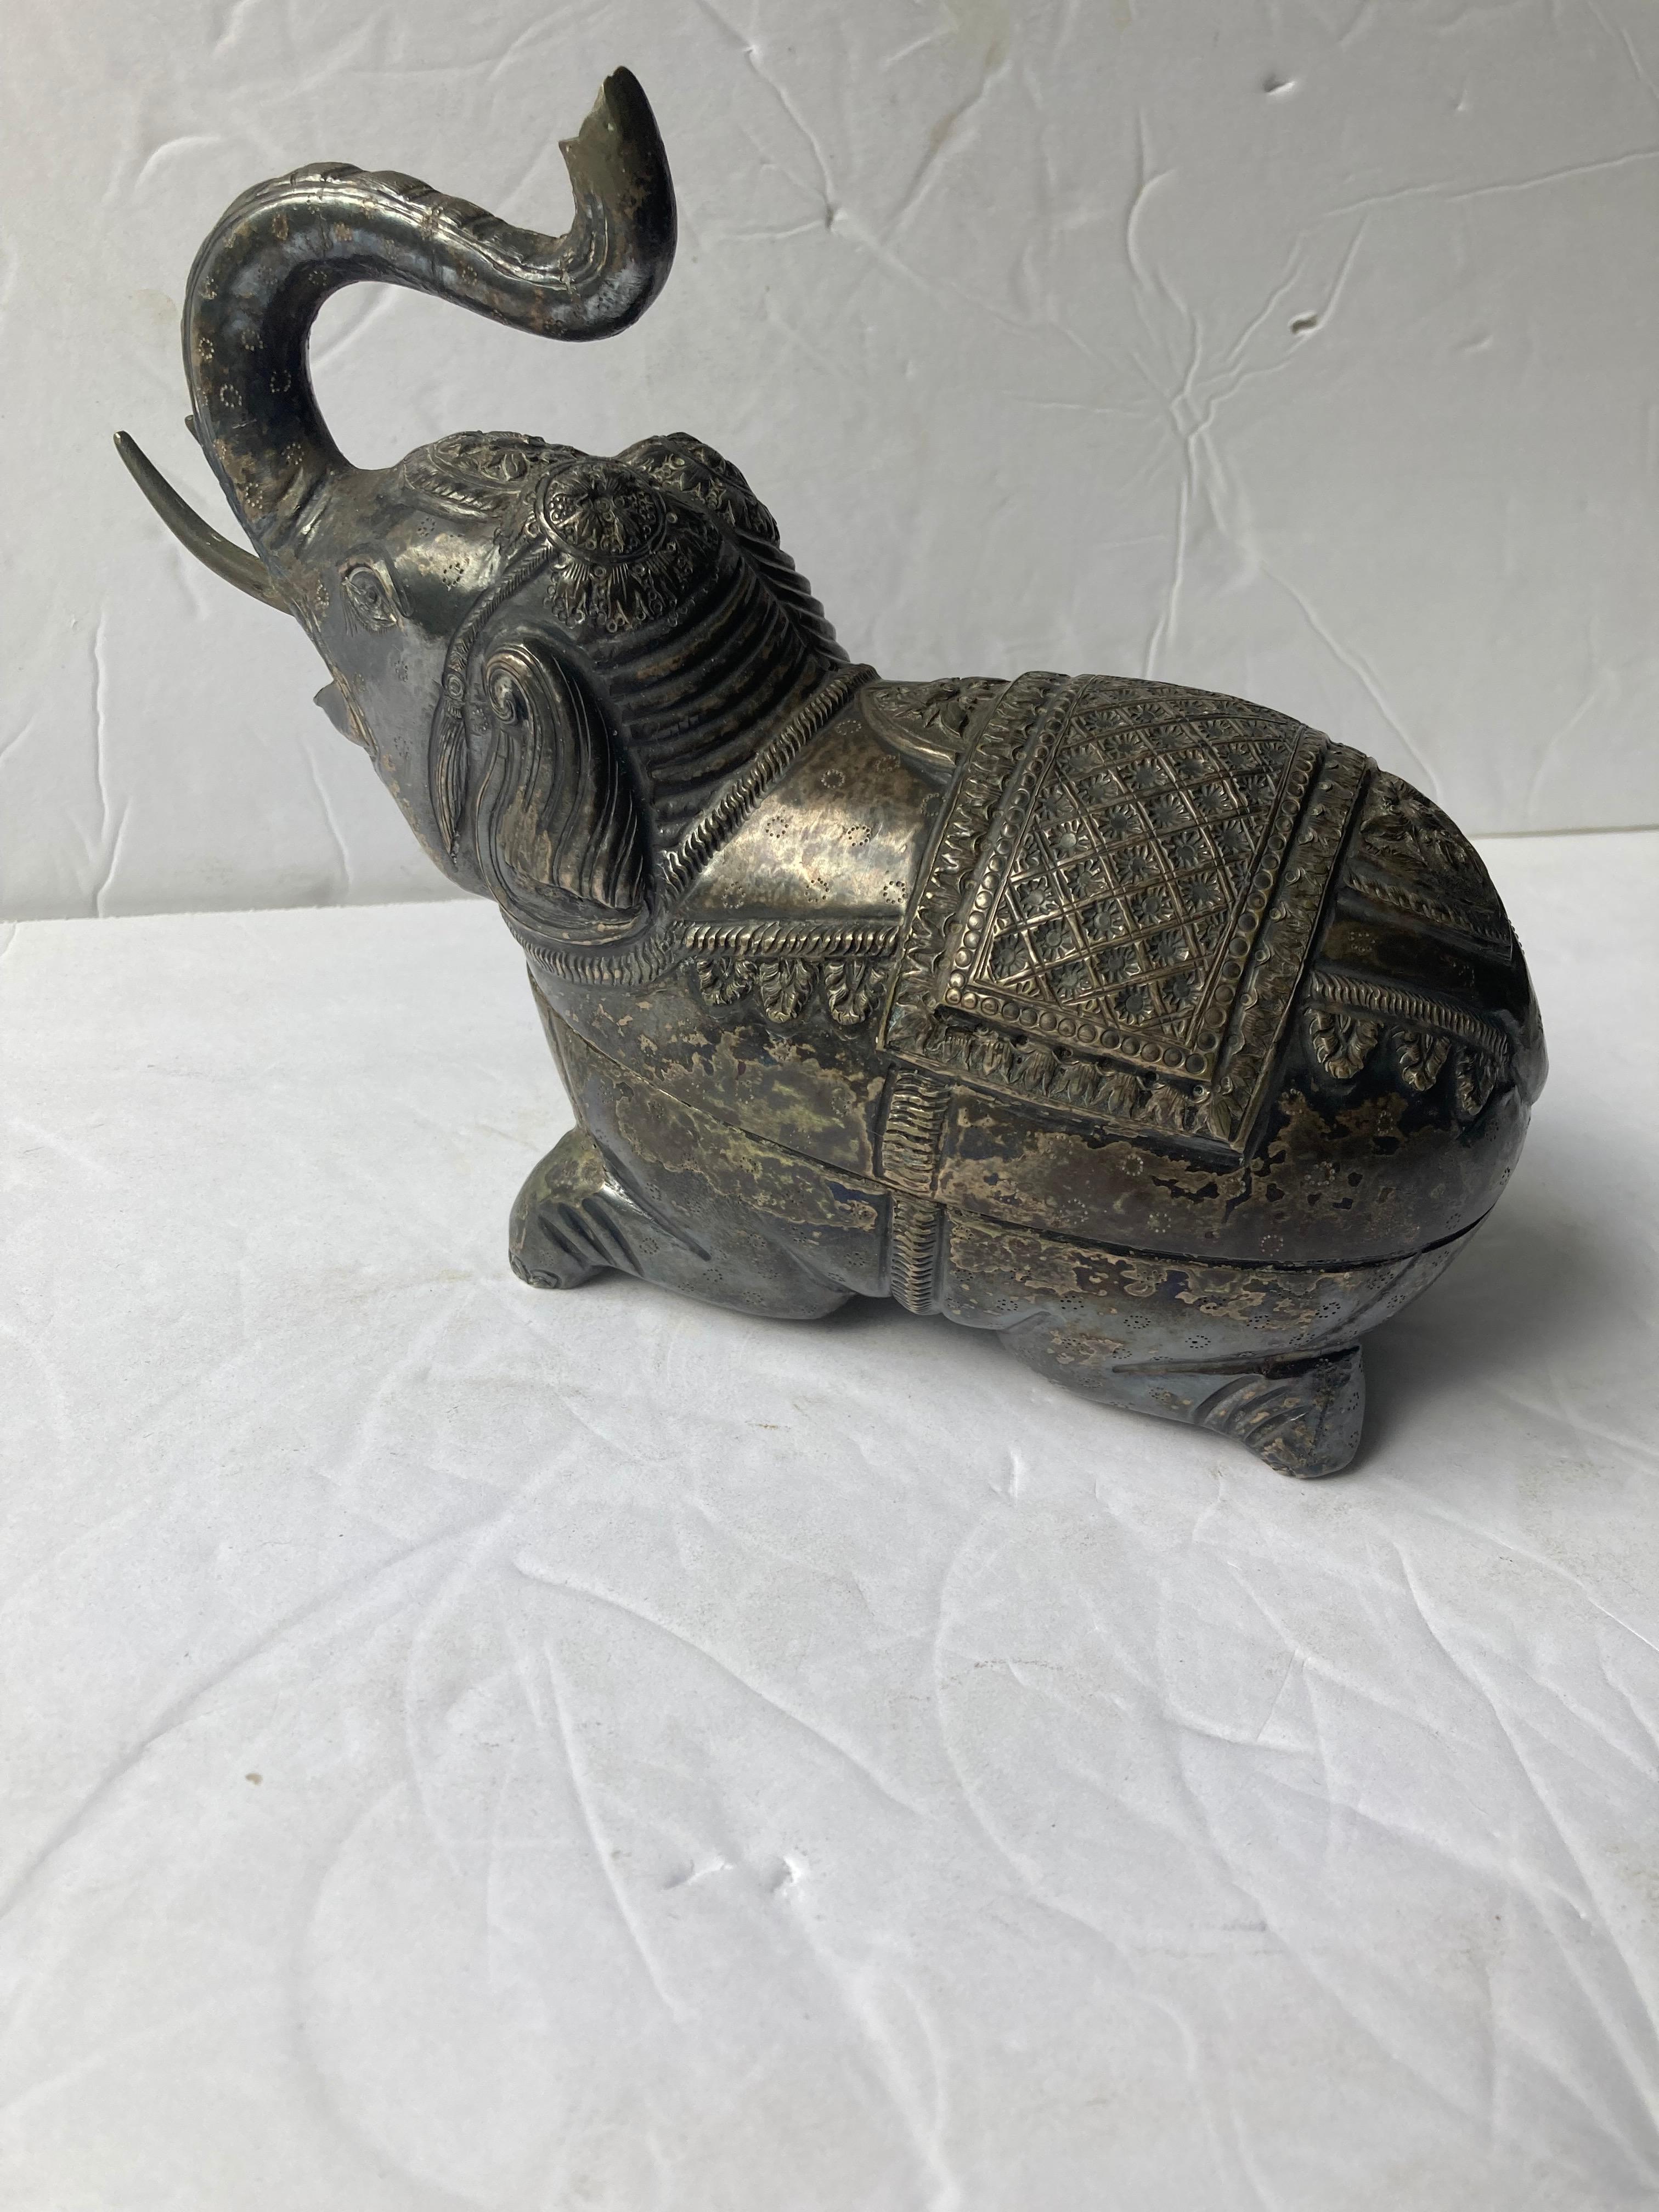 Beautiful silvered metal box of an elephant in a very traditional Anglo -Indian craft, art. Has an amazing age patina in contrast with the inside, as shown.